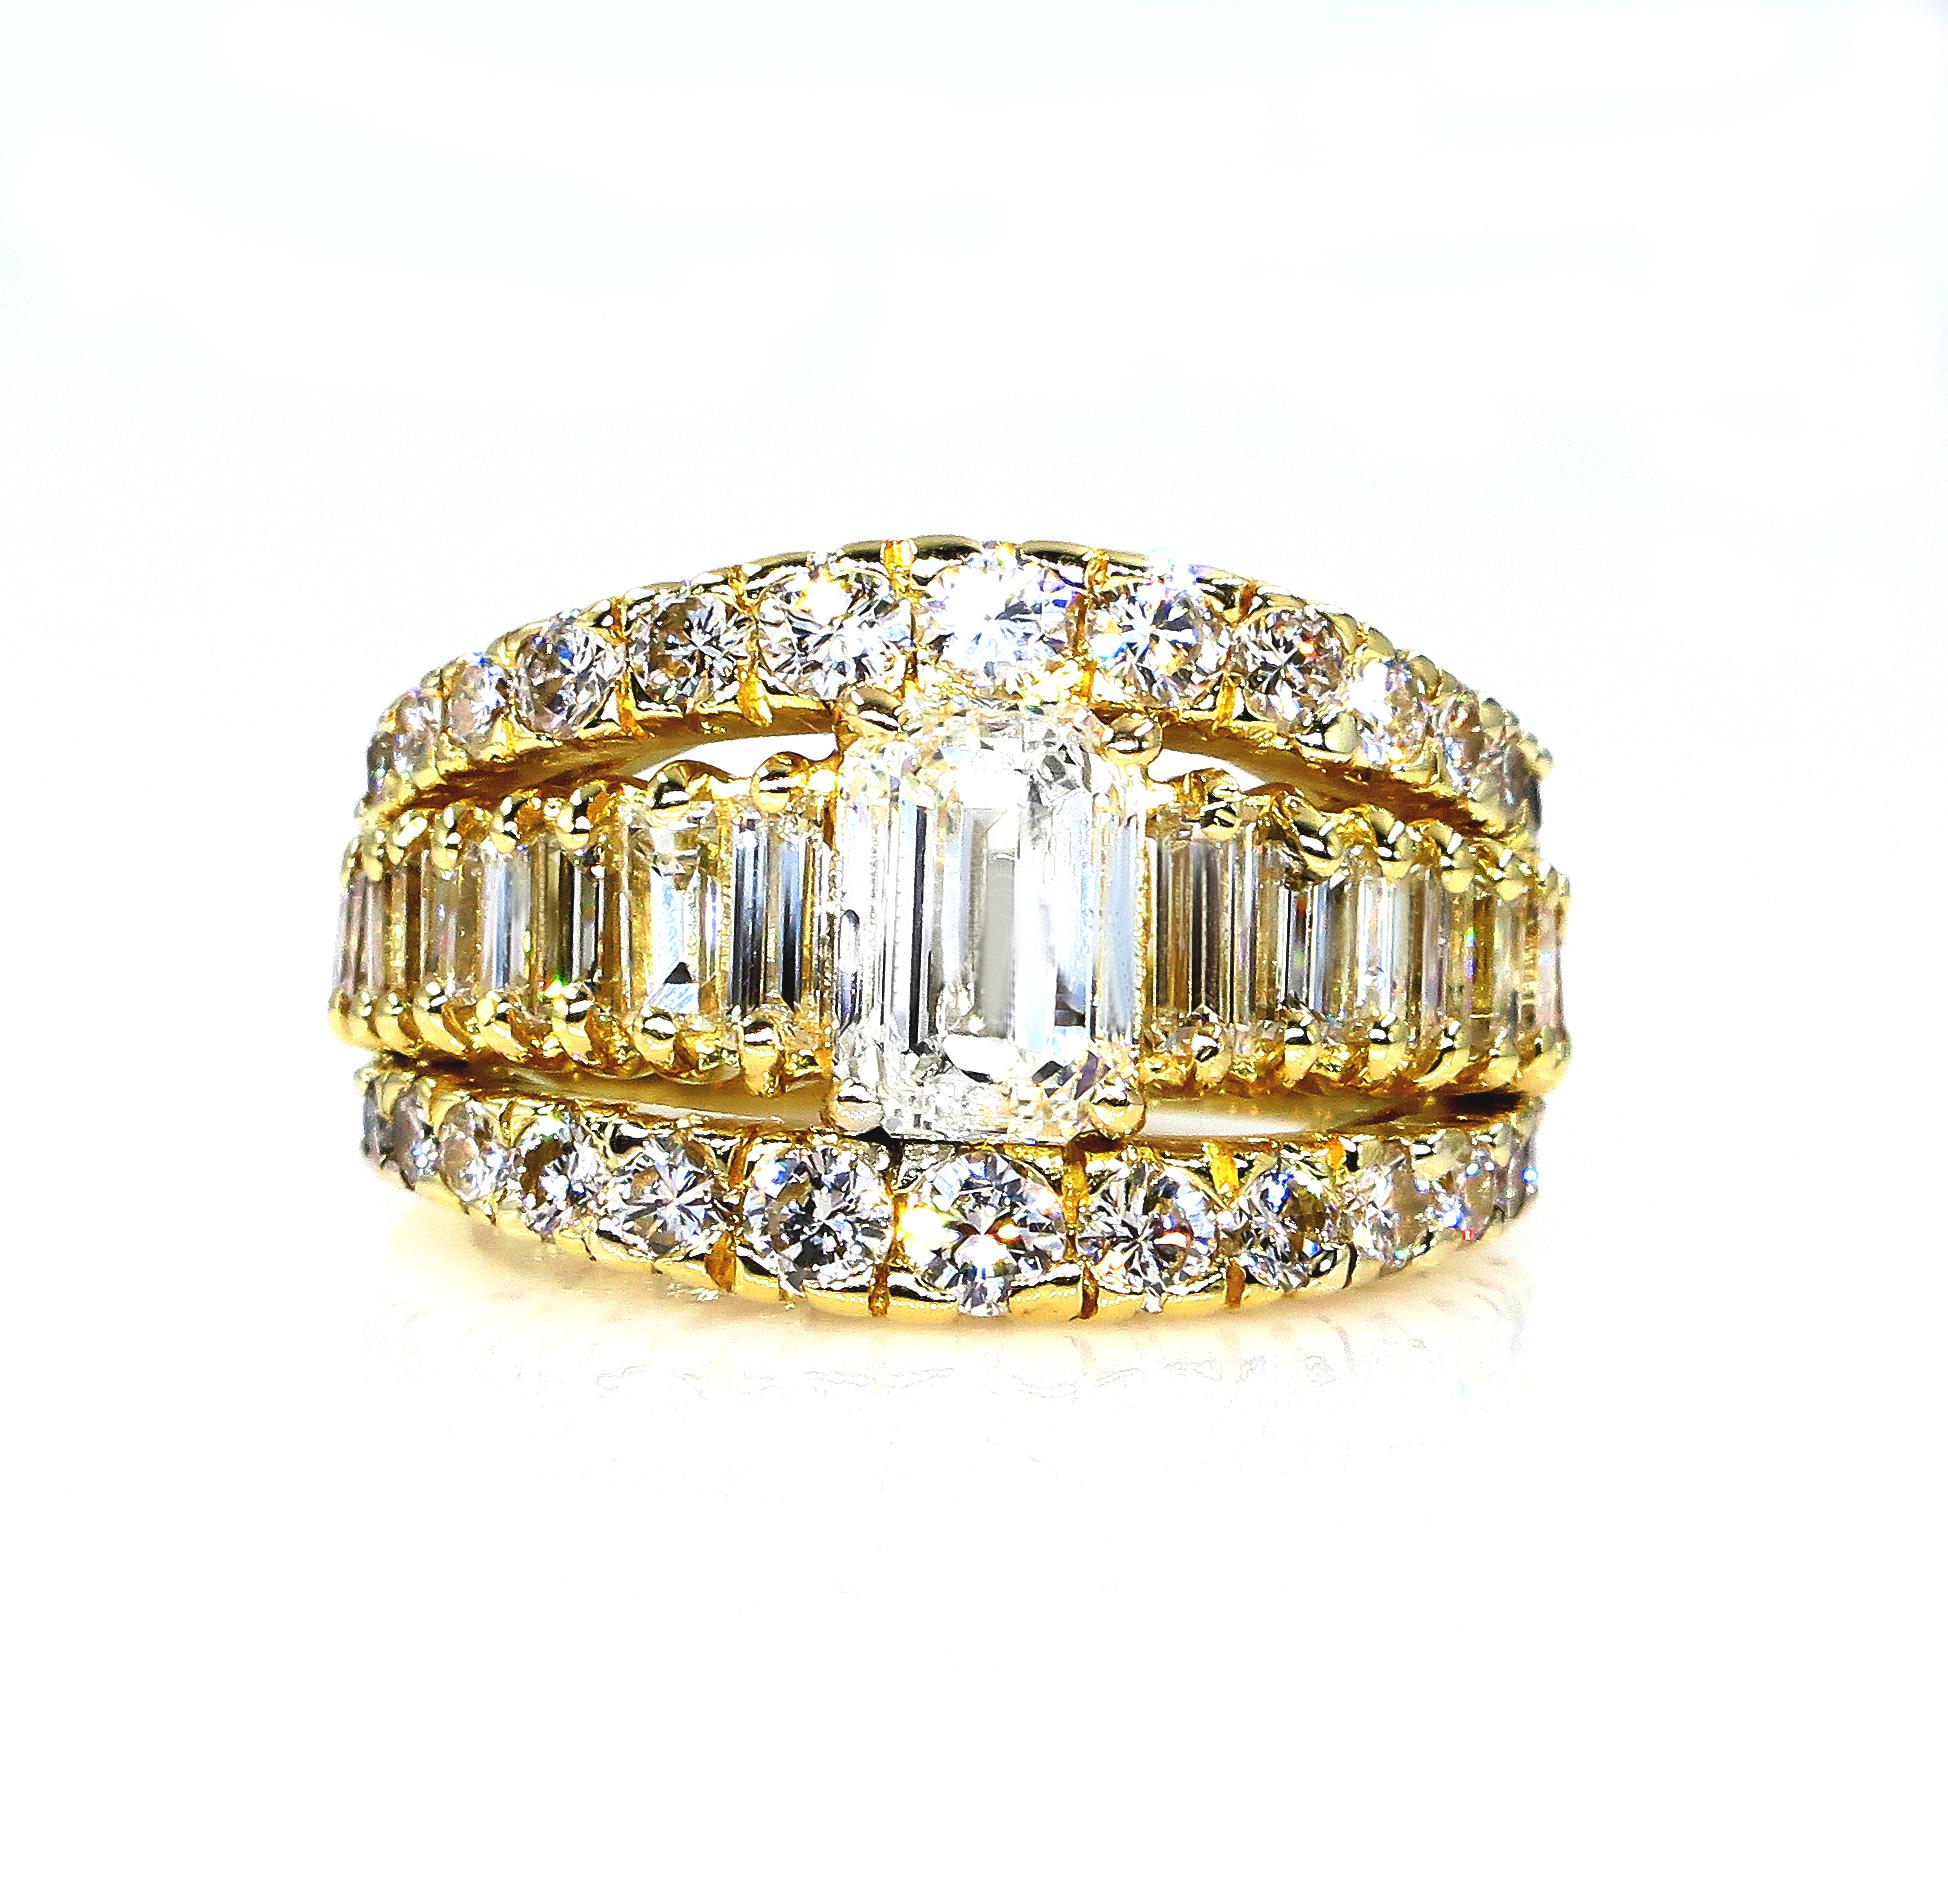 This dramatic and dynamic, uniquely Fabulous Vintage Estate Ring explodes in a blaze of bright white diamonds weighing approx. 4.00 carats total with gorgeous 1.20ct Emerald cut diamond in the center.
The center diamond accompanied by GIA Diamond